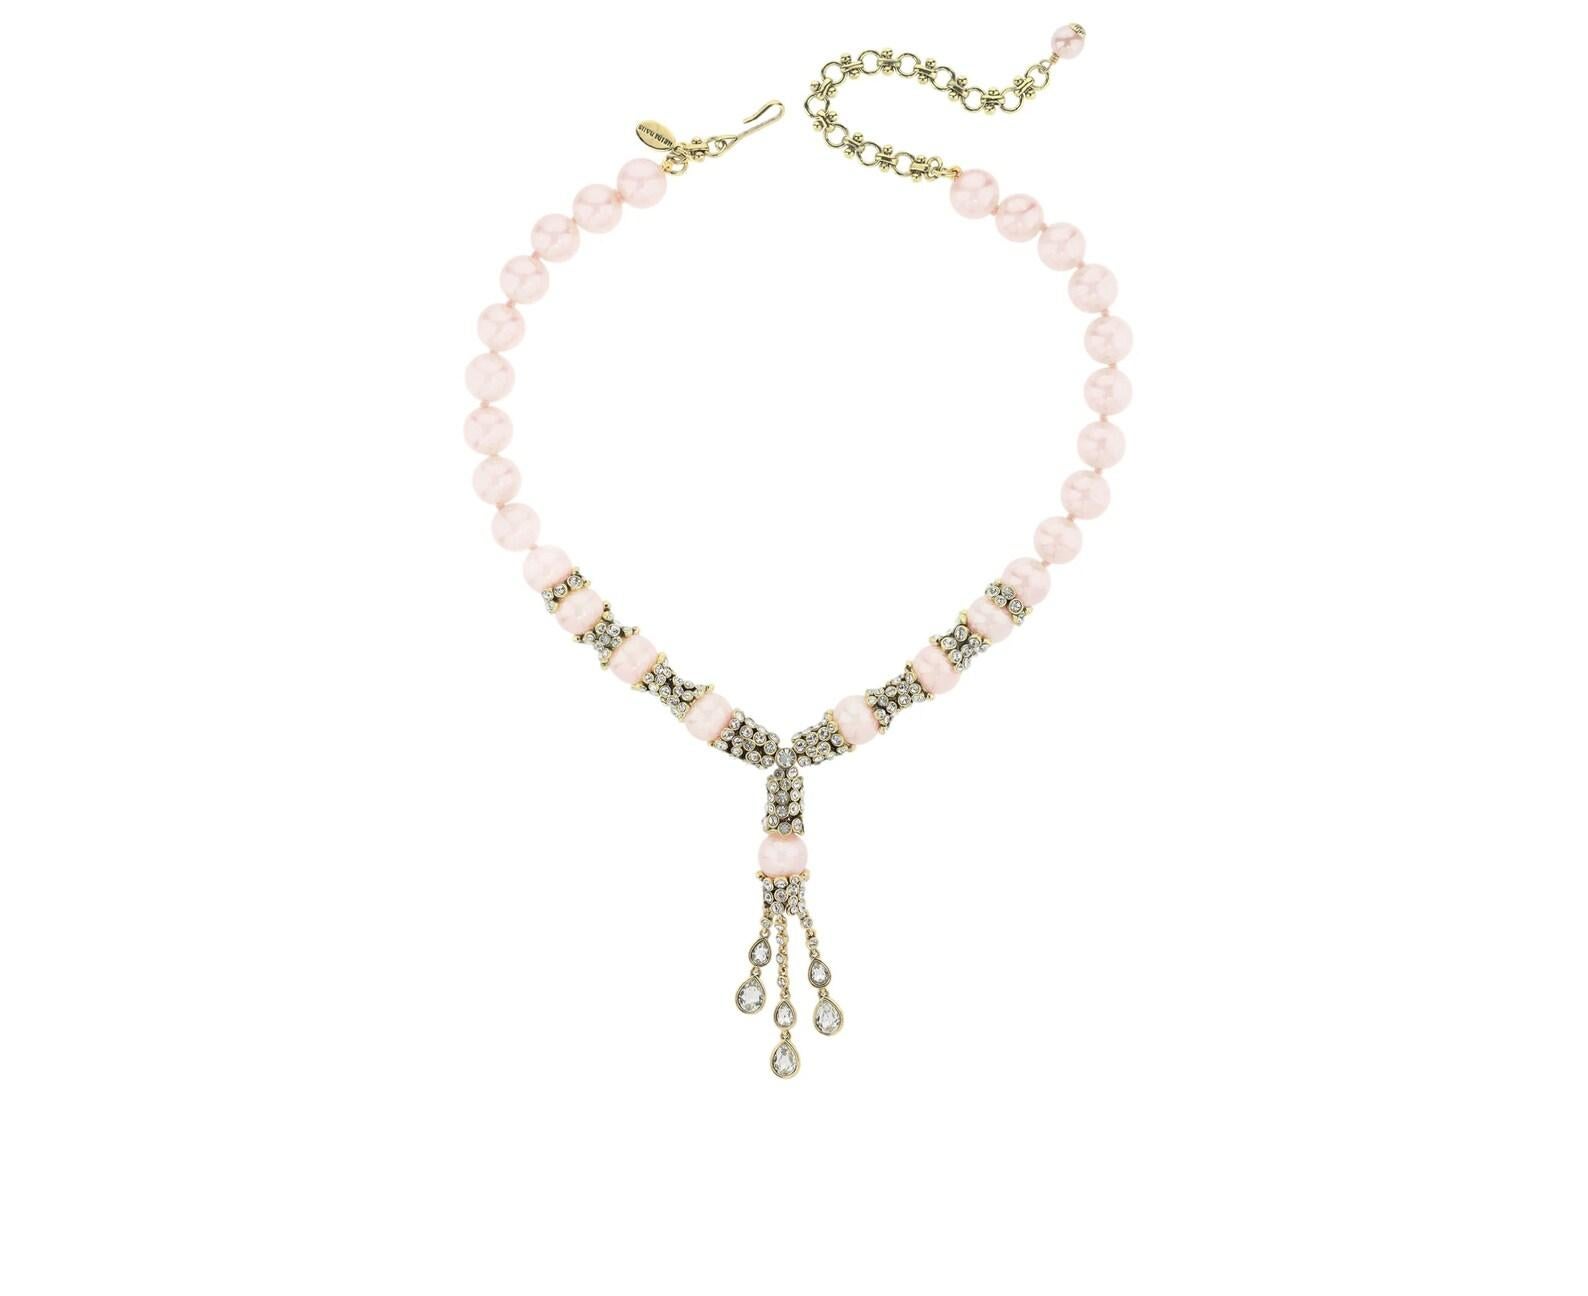 Pearls and diamonds are a Heidi Girl’s best friend, and our Tear Drop Beaded Crystal Necklace Set combines both for a luxurious and classic piece that’s an instant family heirloom. A single strand of Light Pink color beads is accented by diamond